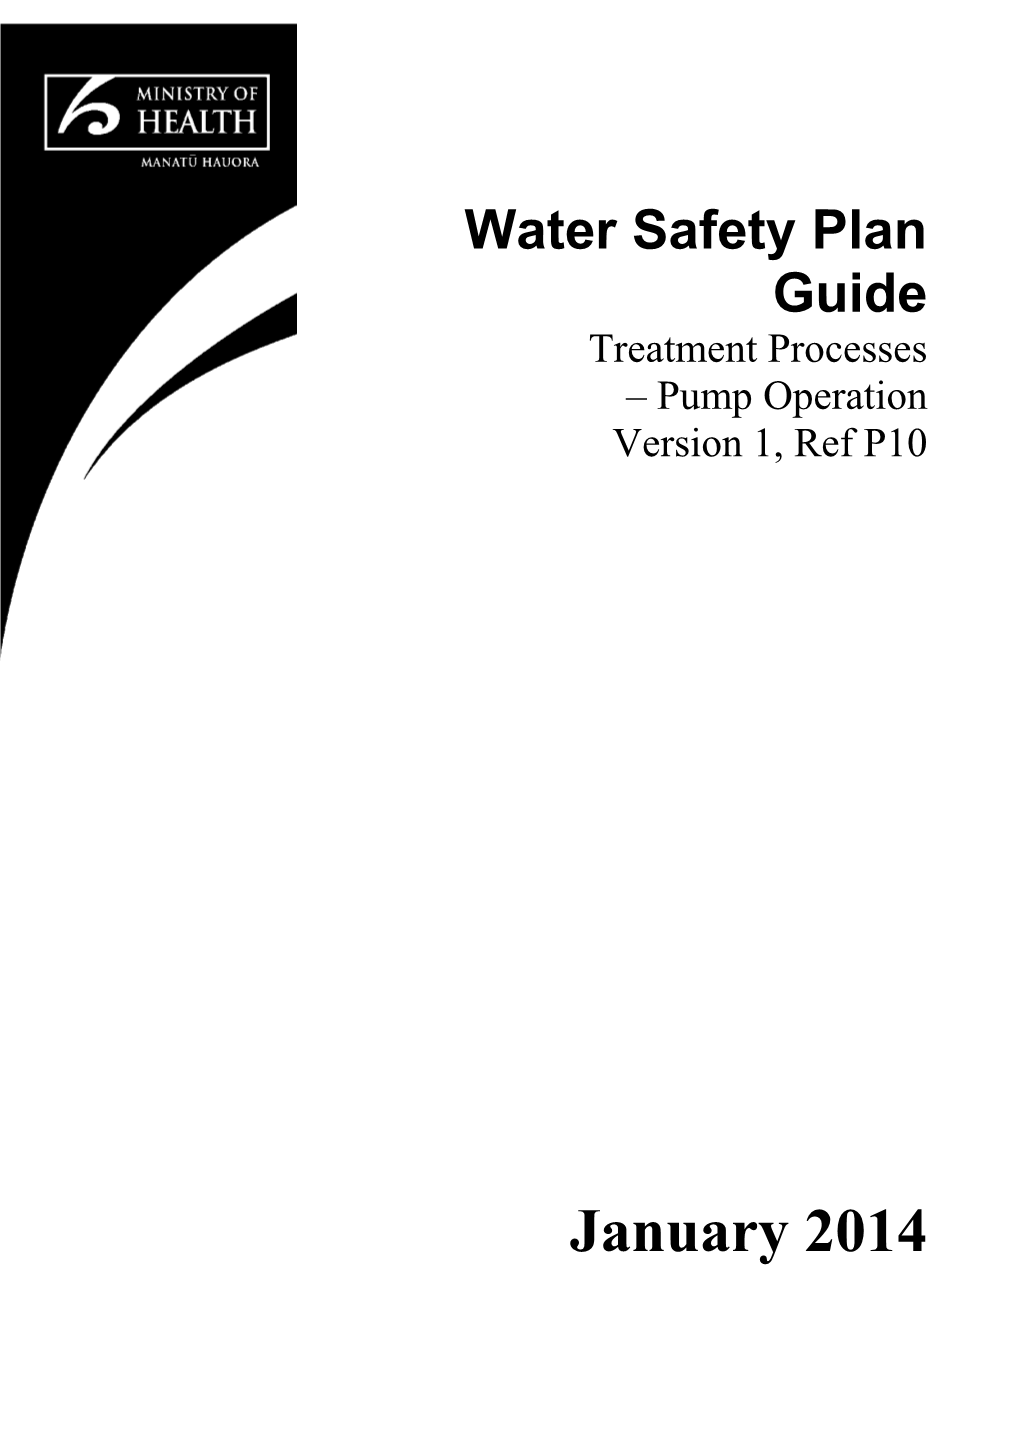 Water Safety Plan Guide: Treatment Processes Pump Operation